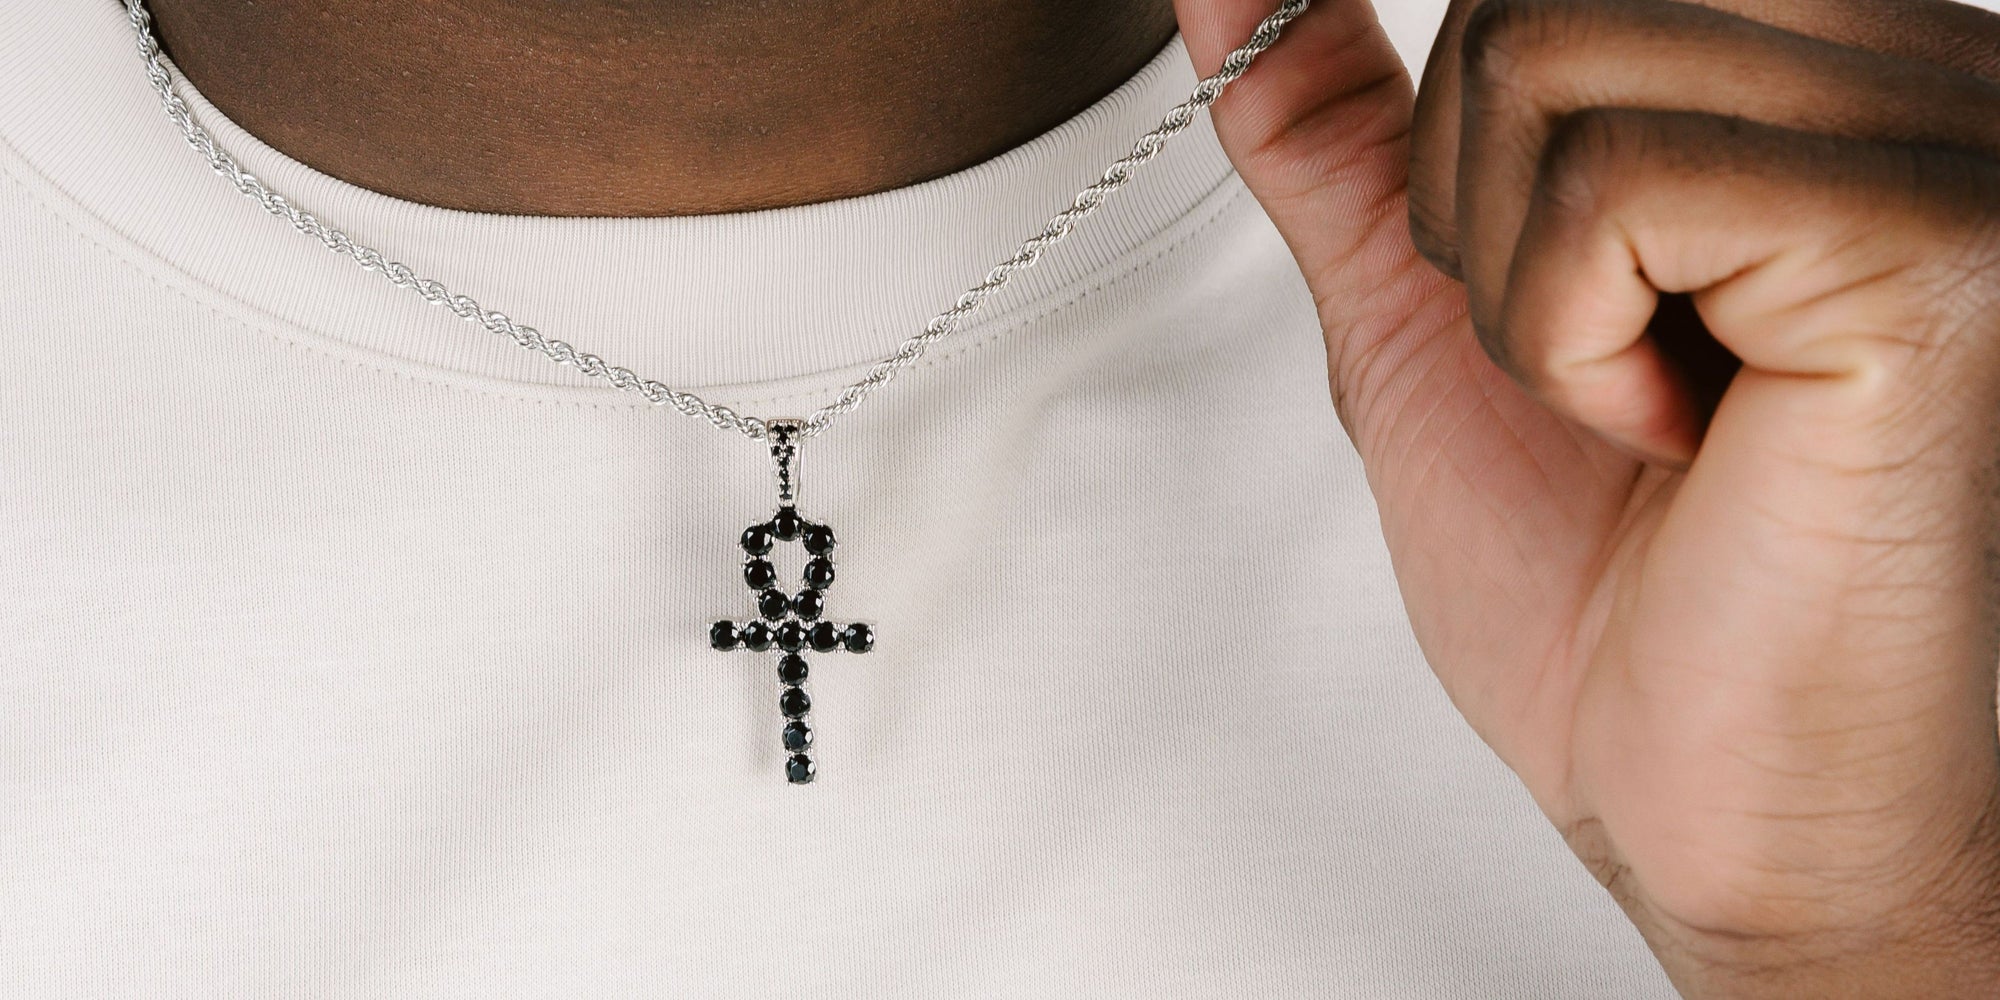 Cross Jewelry: Types, Styles and Meaning Behind The Symbol